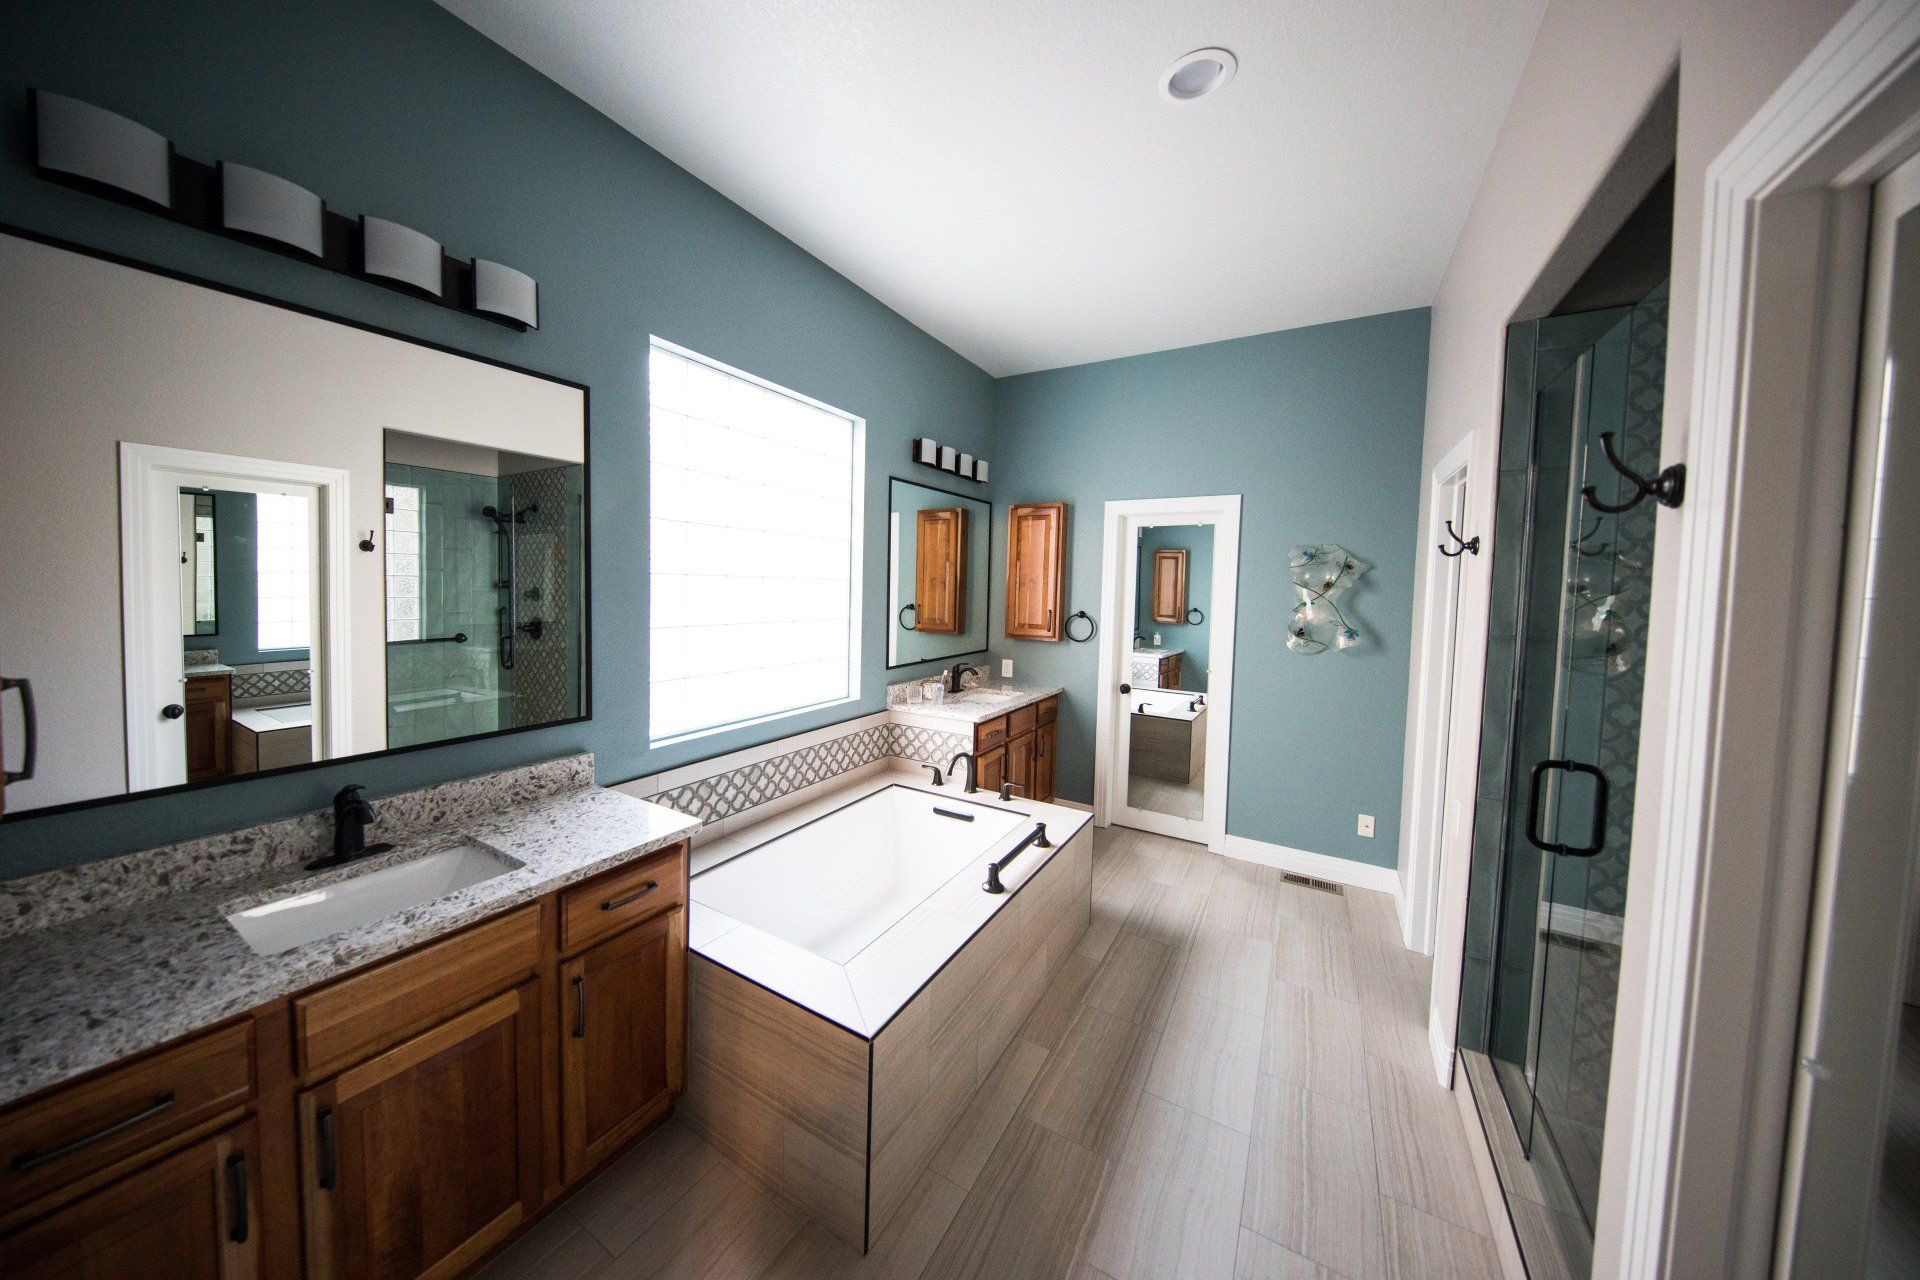 Renovated bathroom in Vermont with modern fixtures.